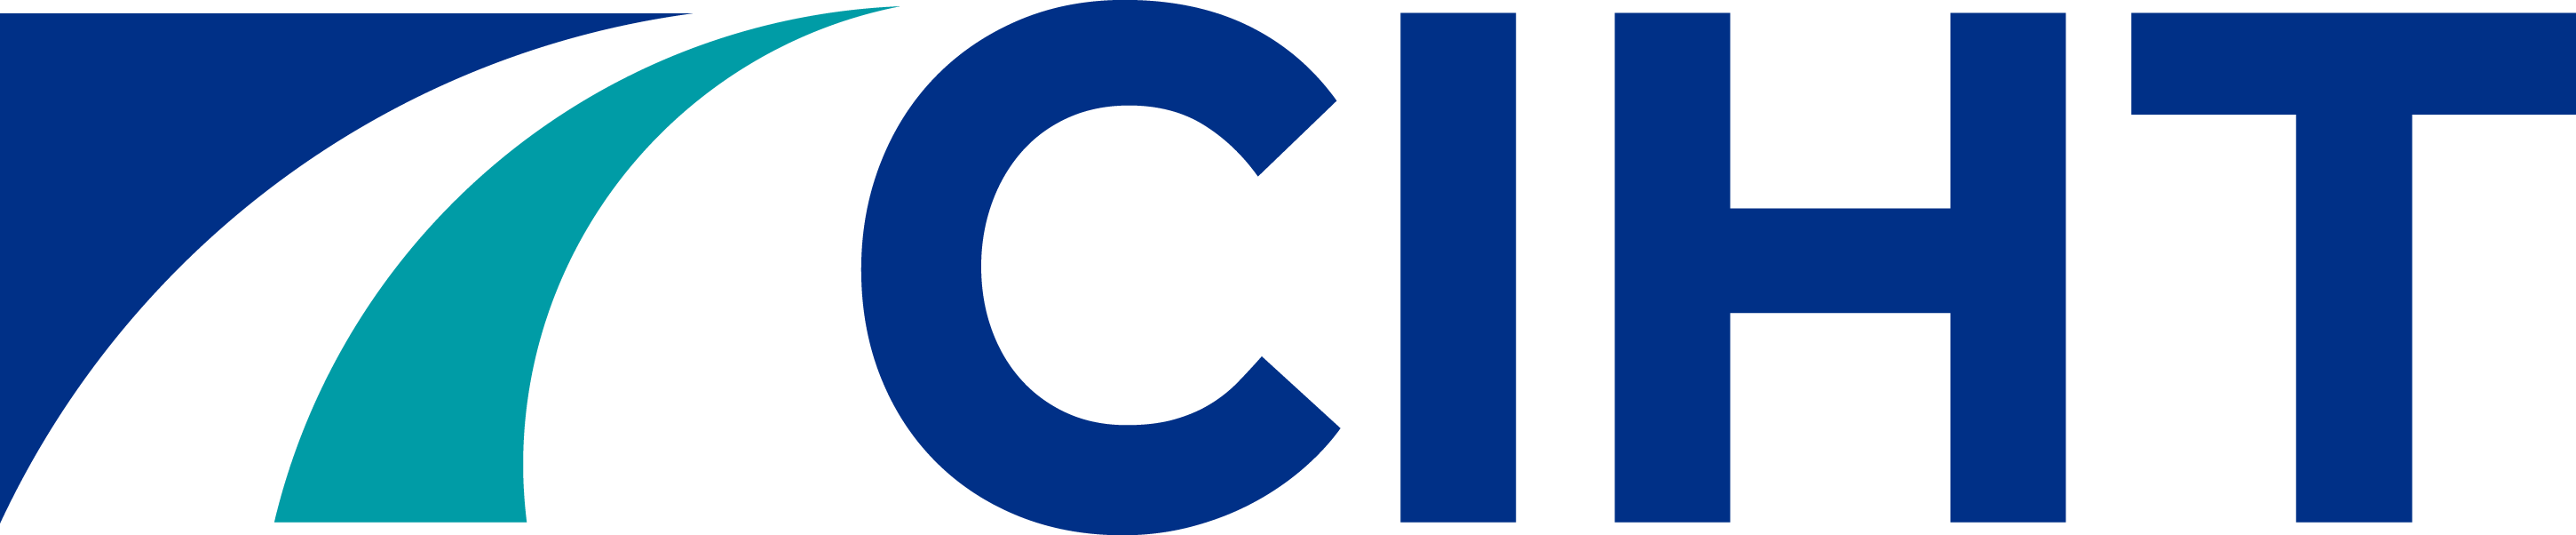 CITH (Corporate Member of the Chartered Institution of Highways and Transportation)